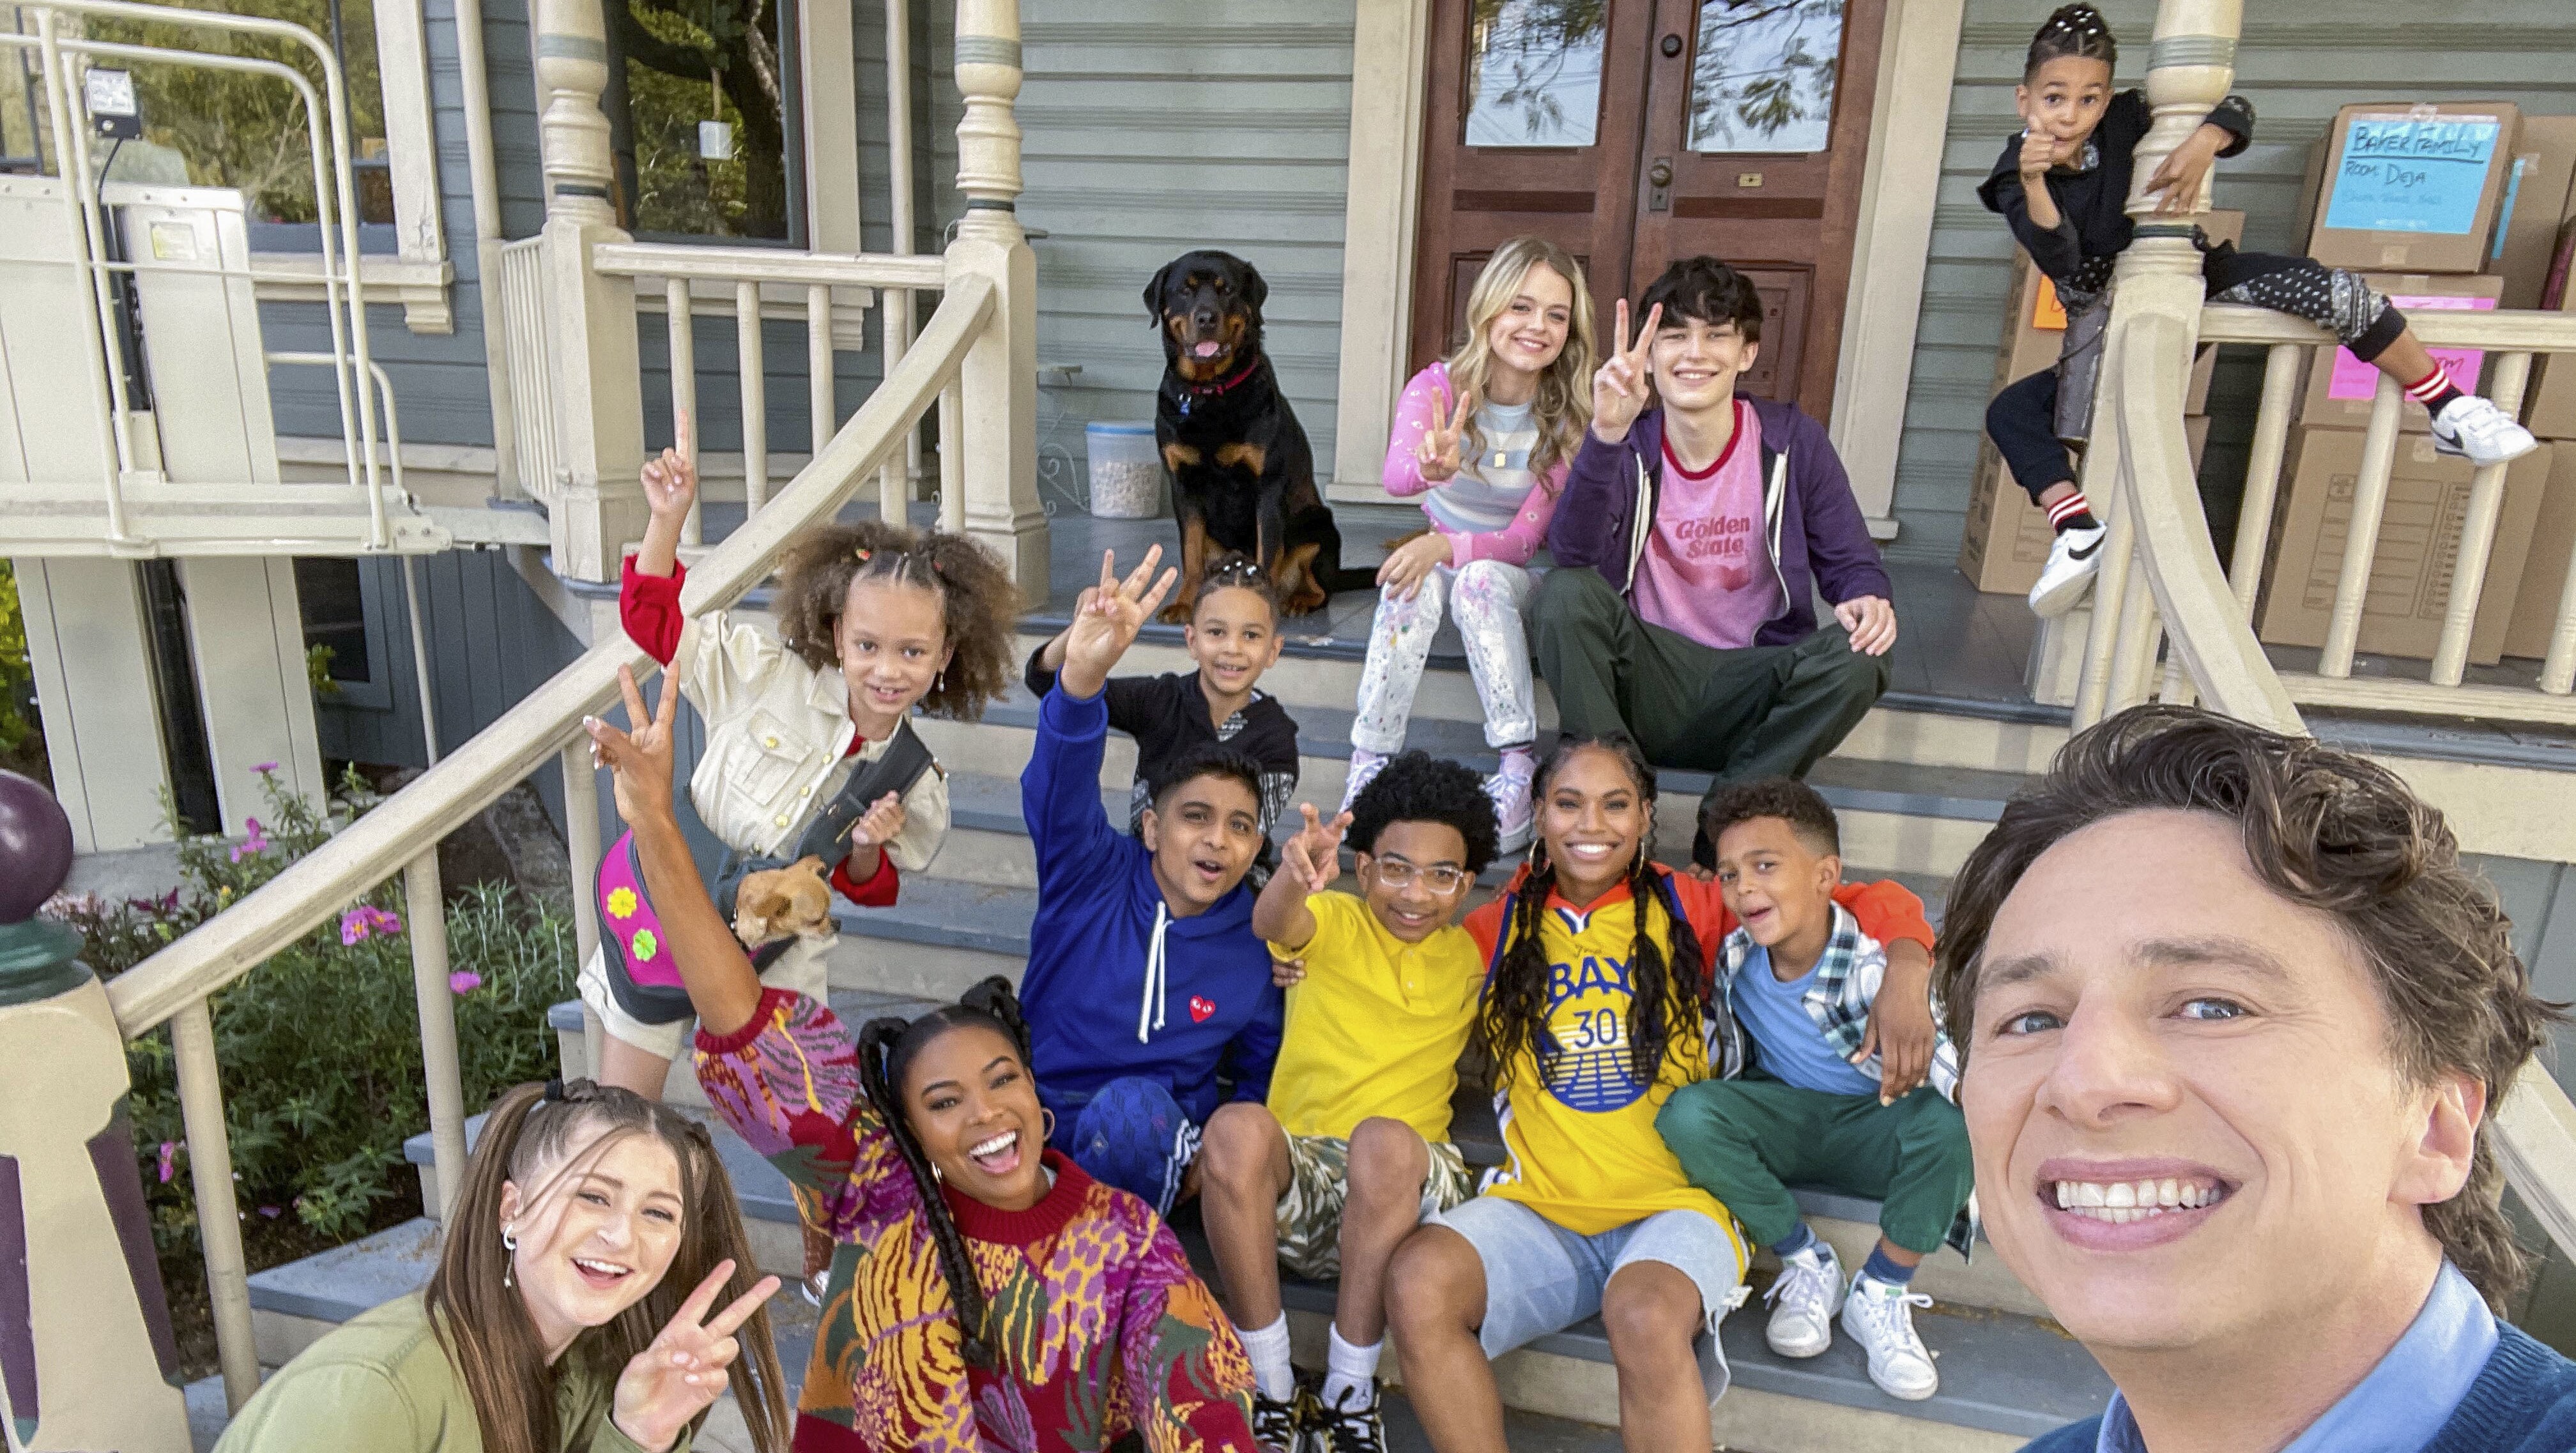 Kylie Rogers as Ella, Luke Prael as Seth, Caylee Blosenski as Harley, Sebastian Cote as Bronx, Gabrielle Union as Zoey Baker, Mykal-Michelle Harris as Luna, Christian Cote as Bailey, Aryan Simhadri as Haresh, Andre Robinson as DJ, Journee Brown as Deja, Leo Abelo Perry as Luca, and Zach Braff as Paul Baker on the set of 20th Century Studios' CHEAPER BY THE DOZEN, exclusively on Disney+. Photo courtesy of 20th Century Studios. © 2022 20th Century Studios. All Rights Reserved.